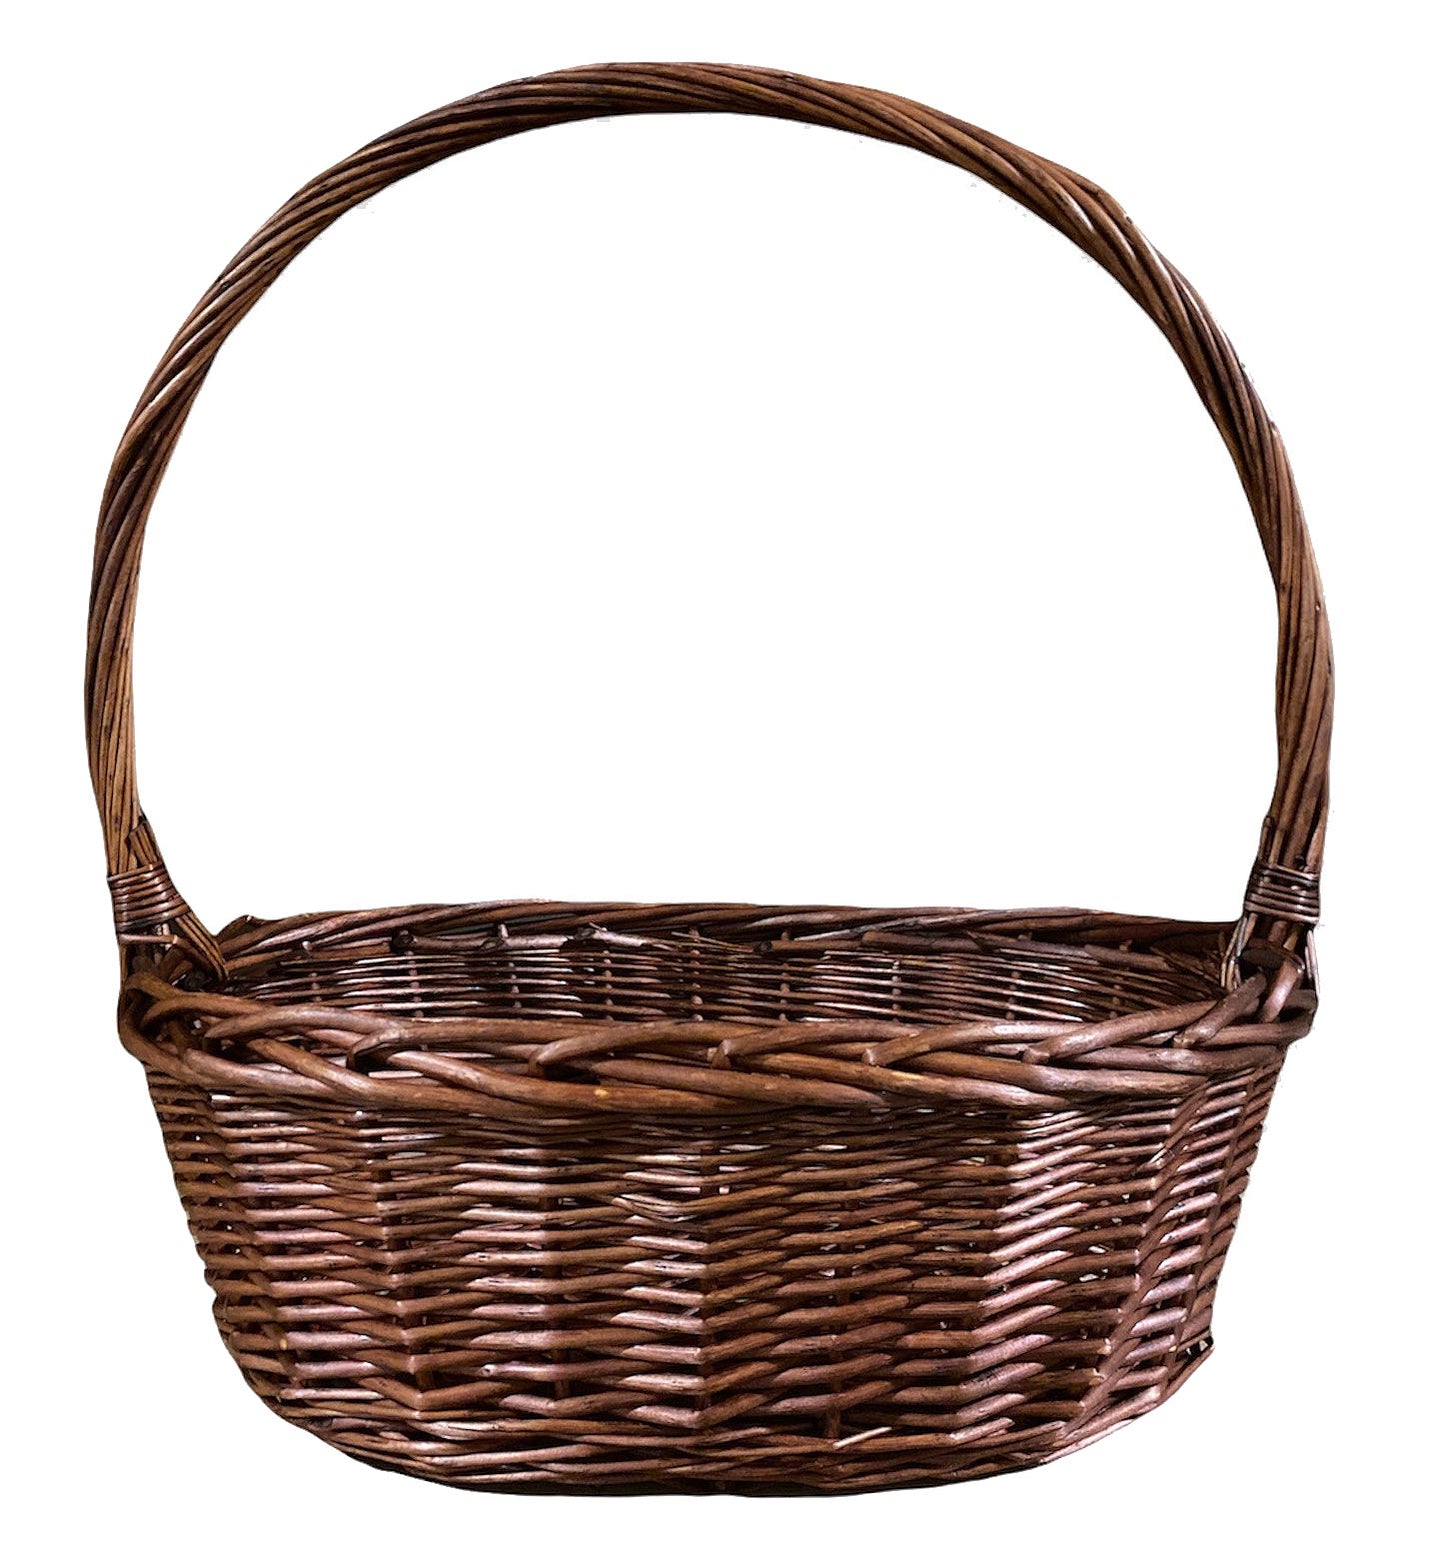 WILLOW OVAL BASKET STAINED 14x11x5x16 HH